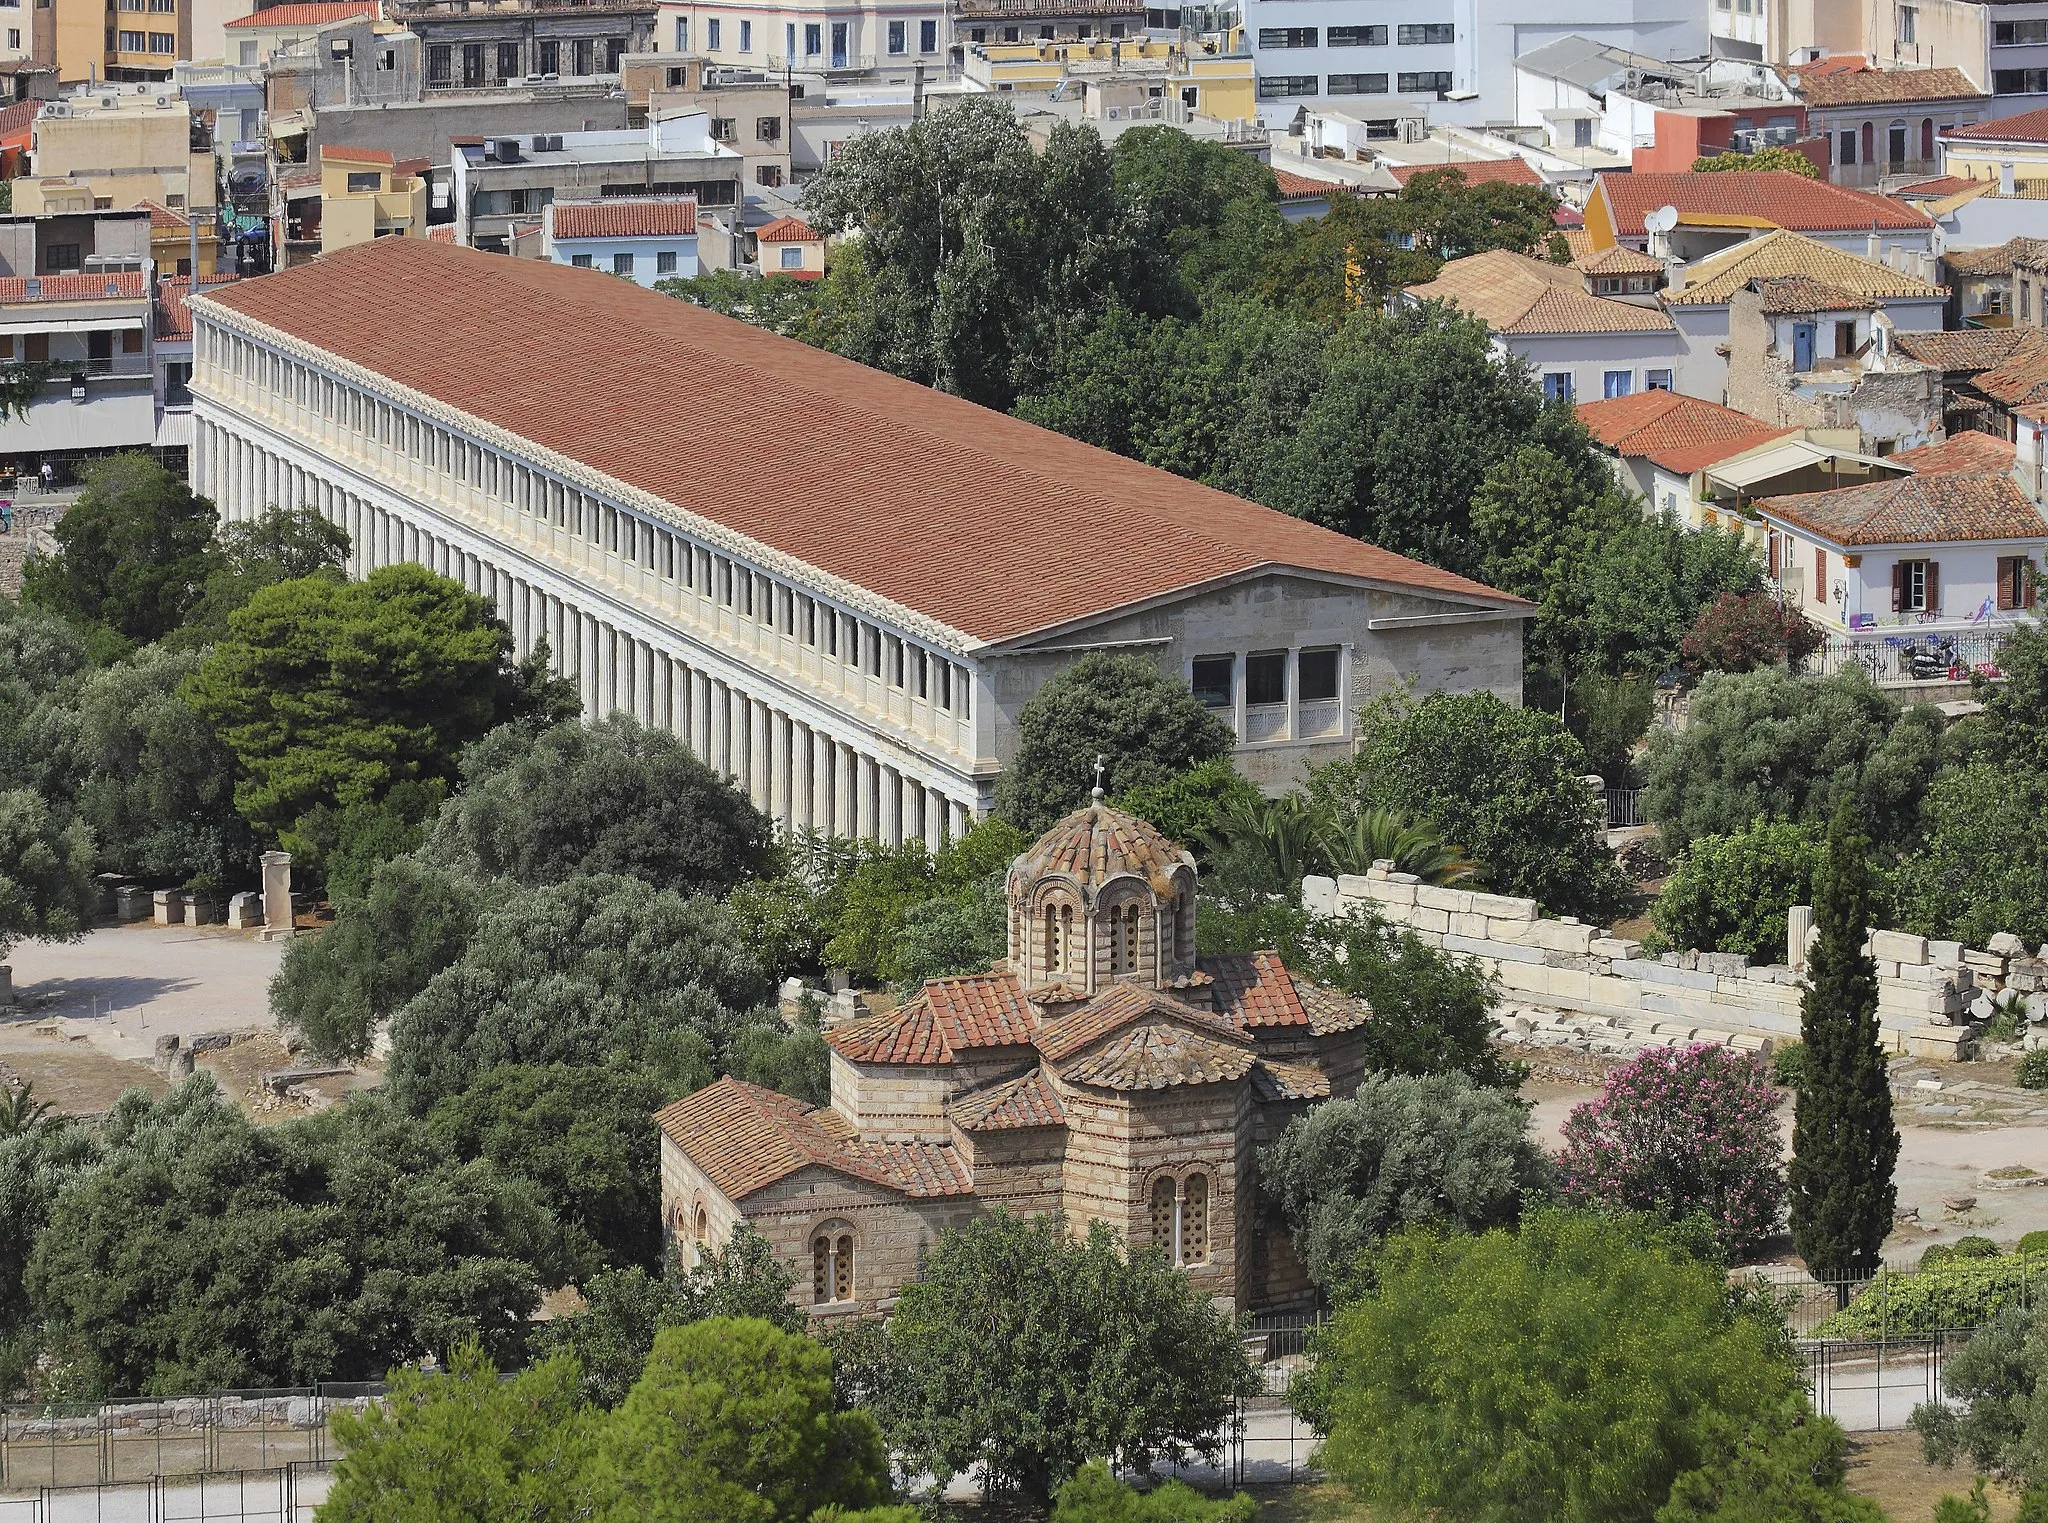 Photo showing: Athens: the Stoa of Attalos (the Museum of the Ancient Agora) and the Church of the Holy Apostles, as seen from Acropolis hill